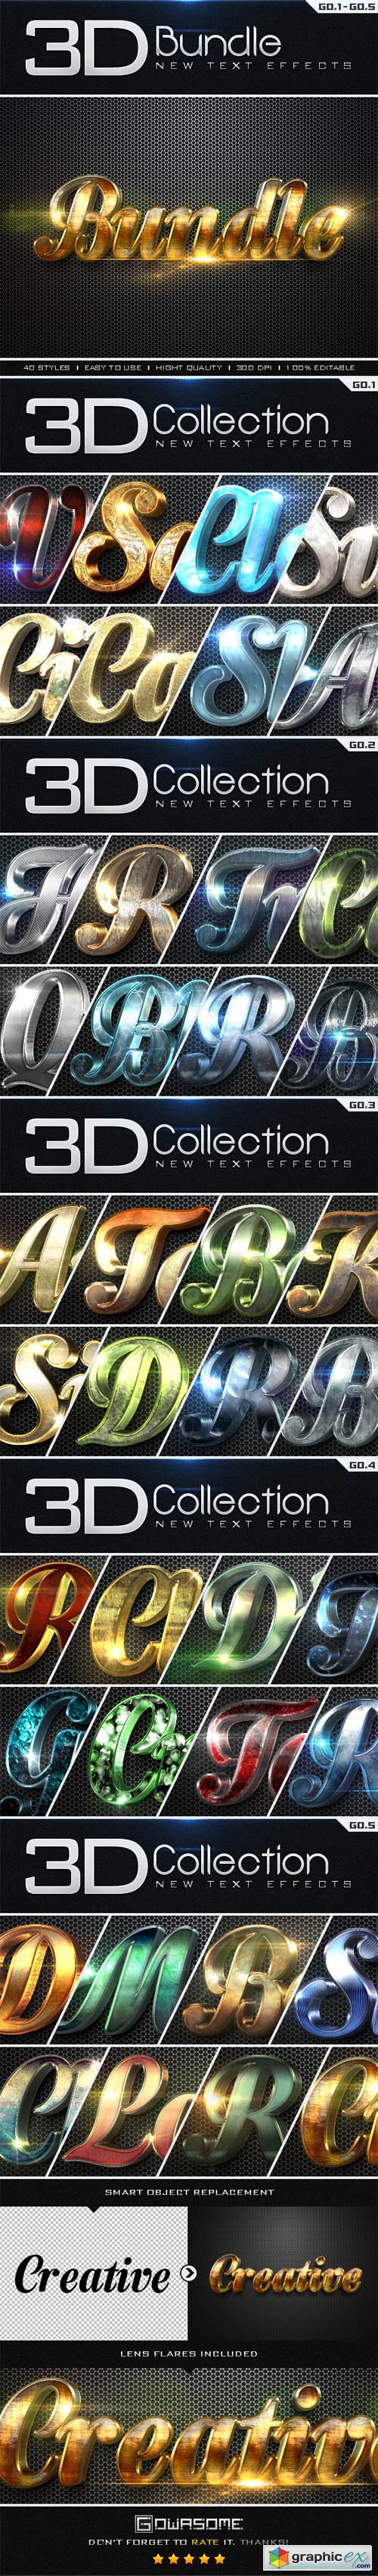 New 3D Collection Text Effects Bundle